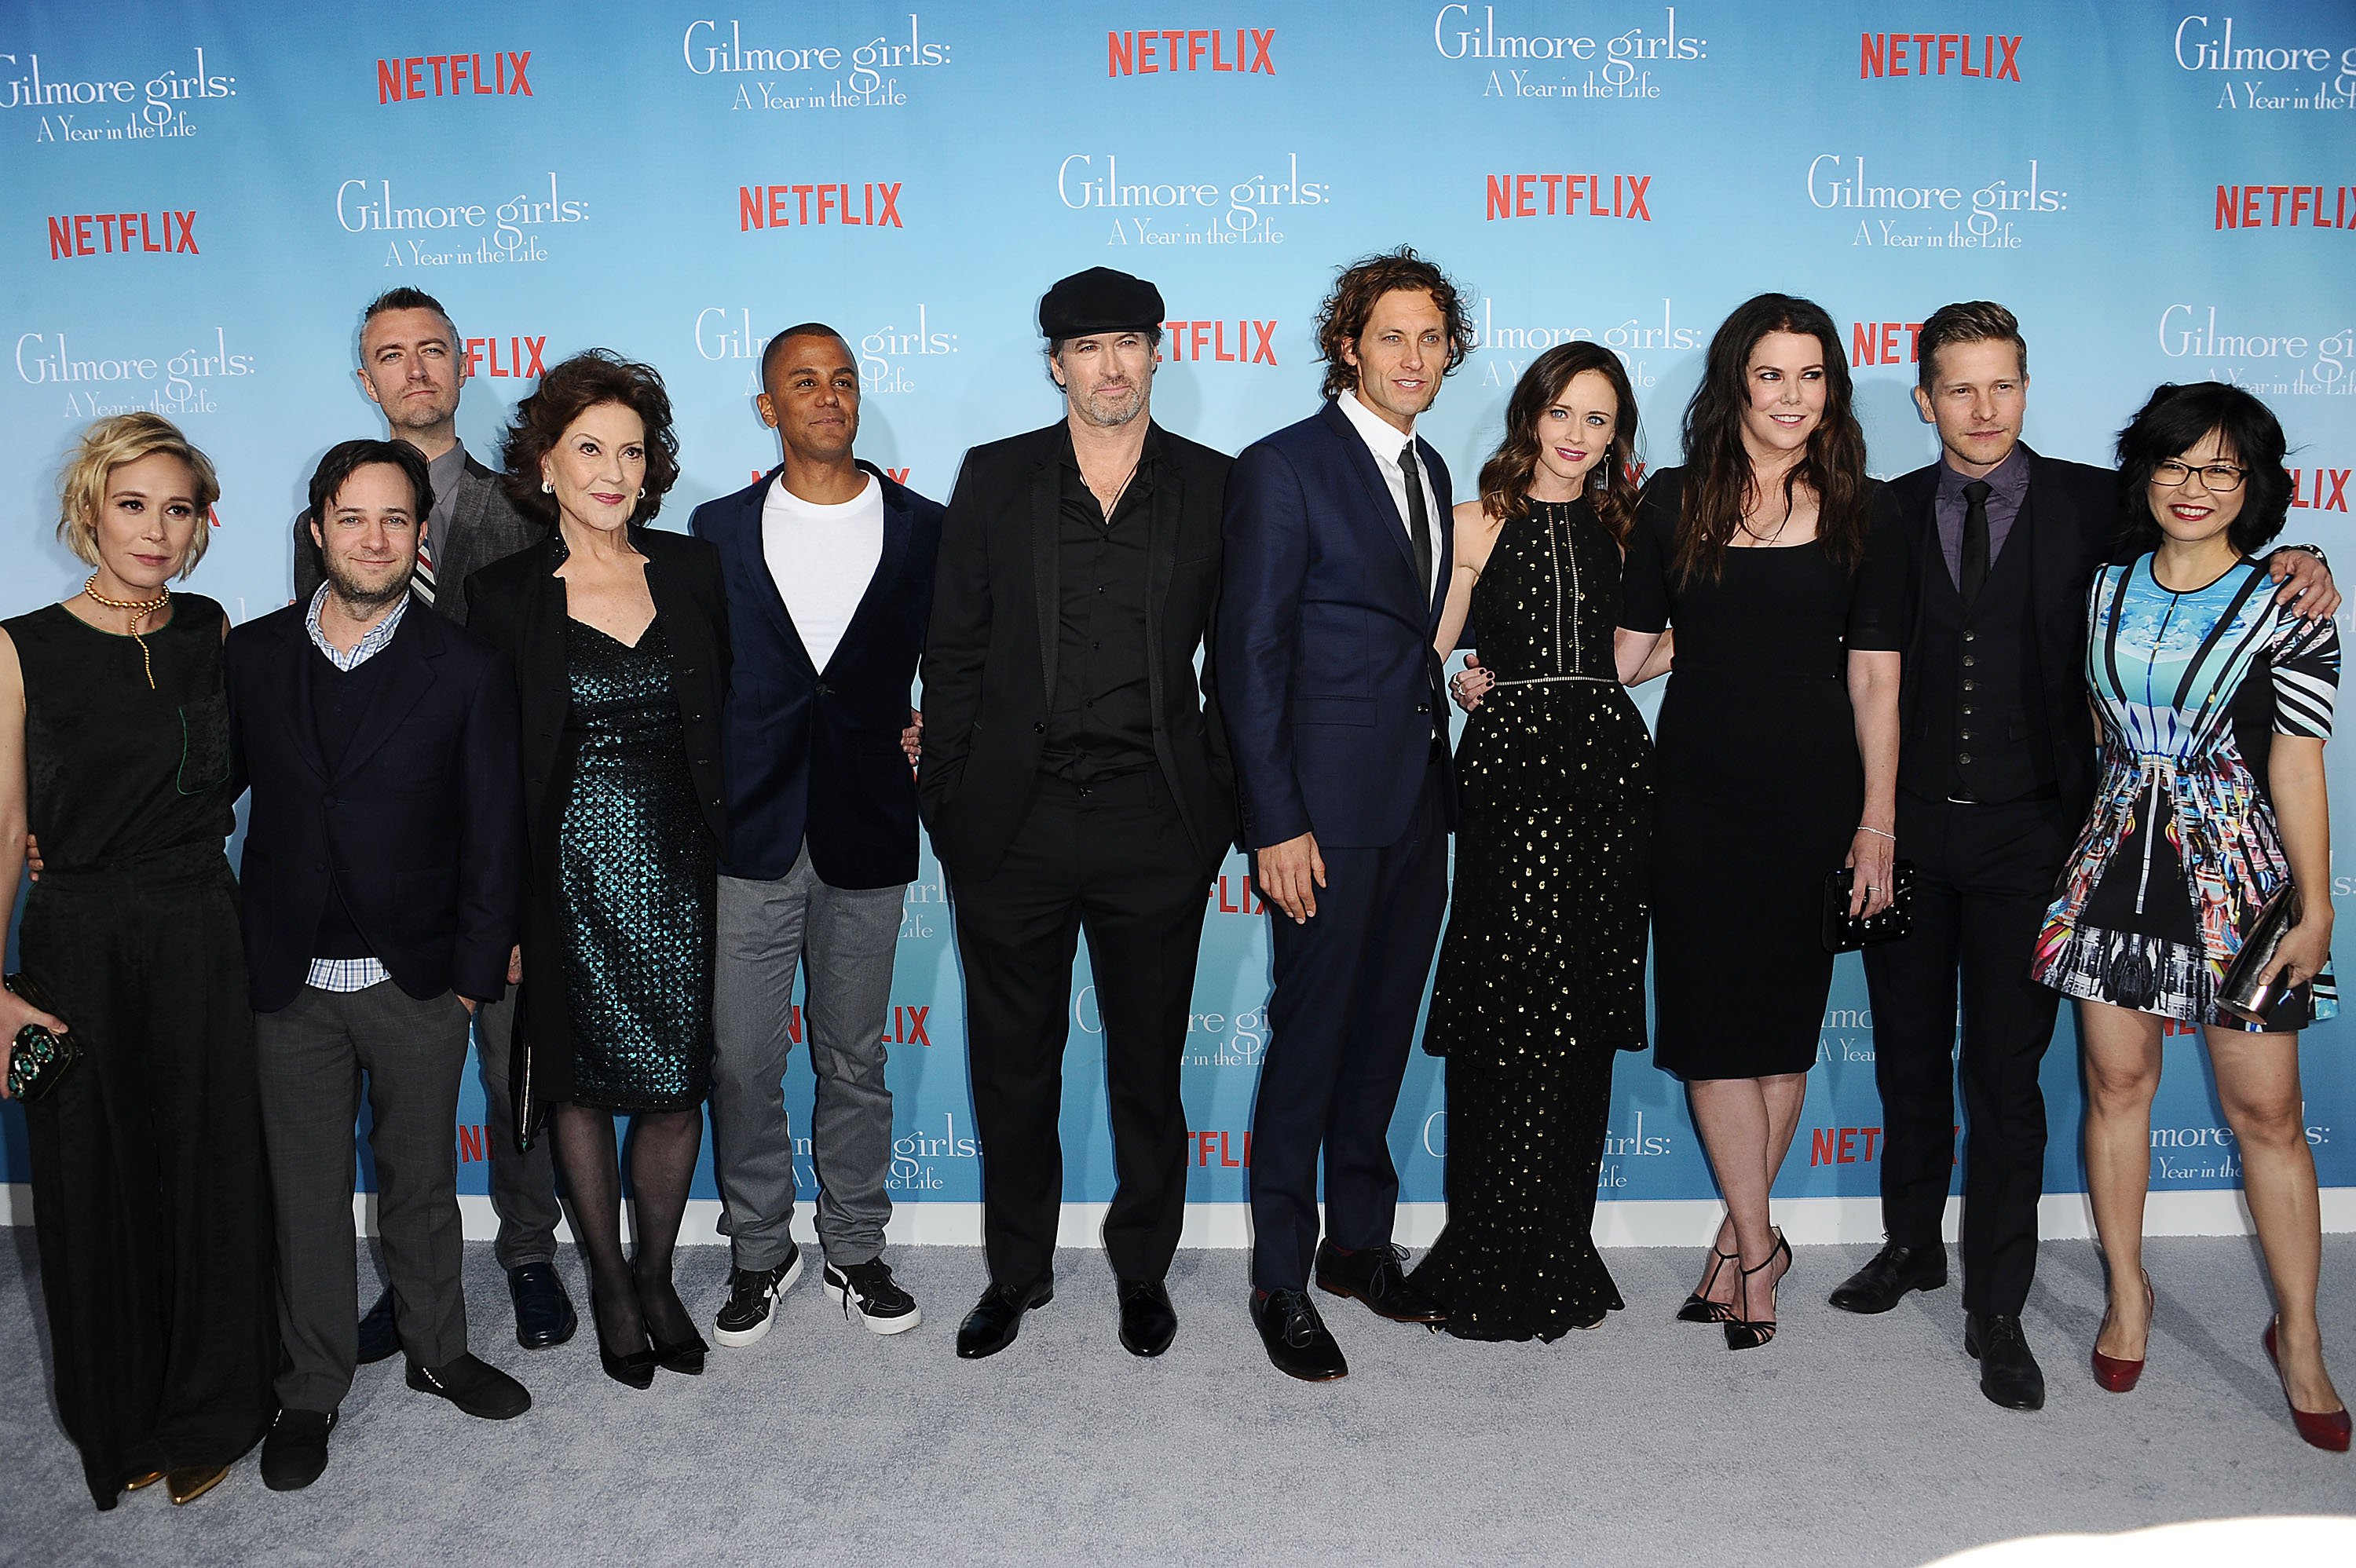 Liza Well, Danny Strong, Sean Gunn, Kelly Bishop, Yanic Truesdale, Scott Patterson, Tanc Sade, Alexis Bledel, Lauren Graham, Matt Czuchry and Keiko Agena attend the premiere of "Gilmore Girls: A Year in the Life" at Regency Bruin Theatre on November 18, 2016